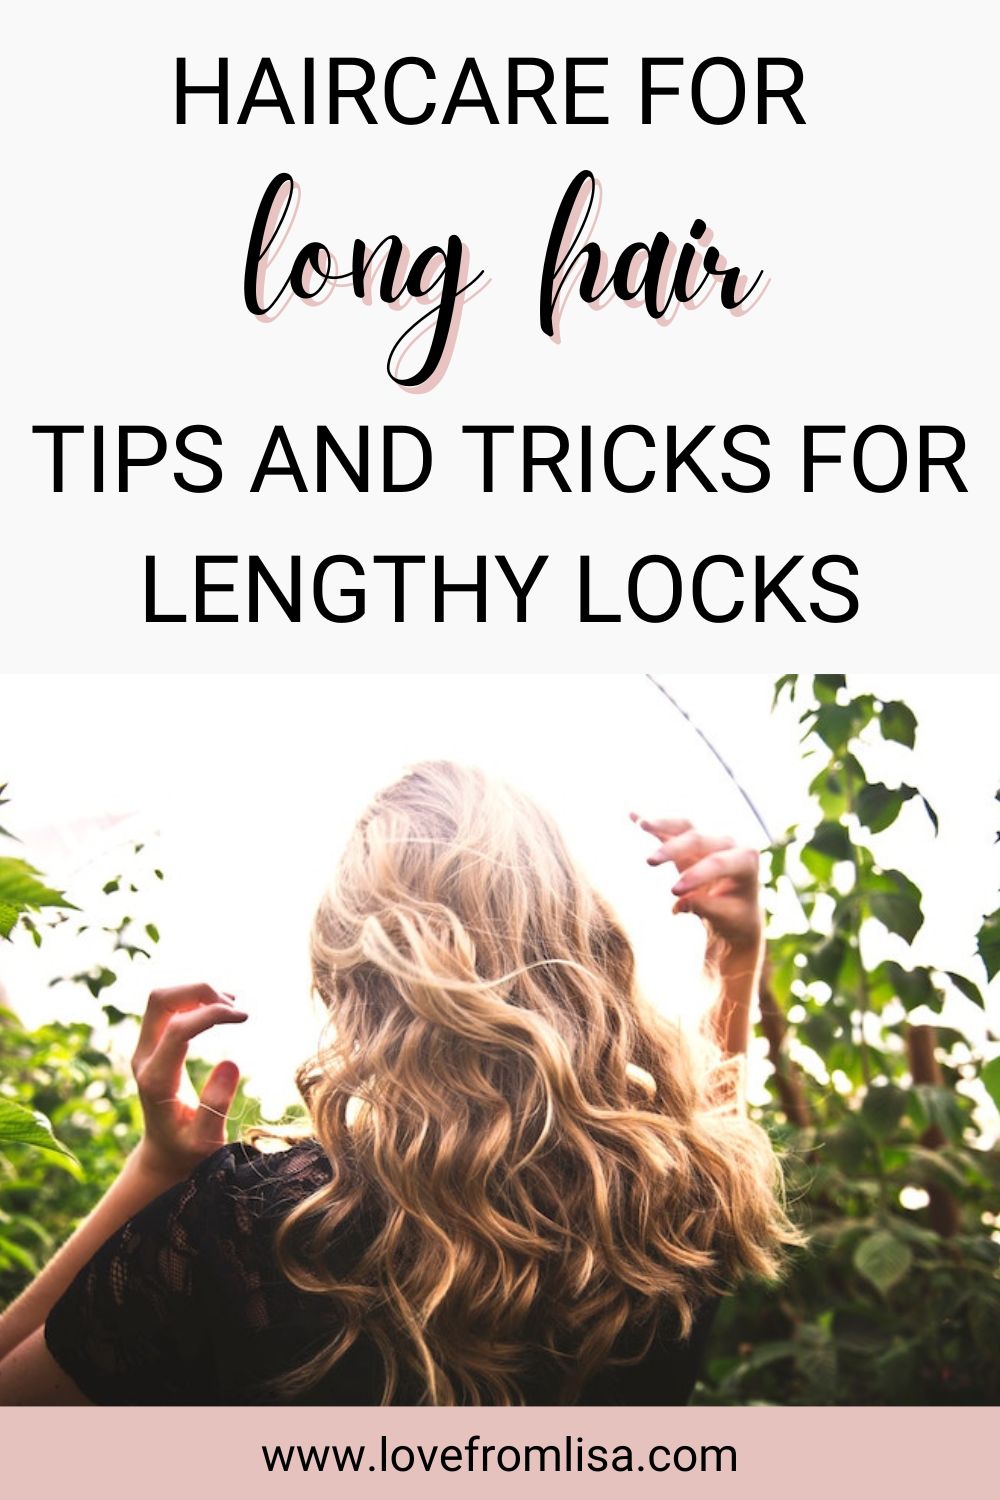 Haircare for long hair. Tips and tricks for lengthy locks